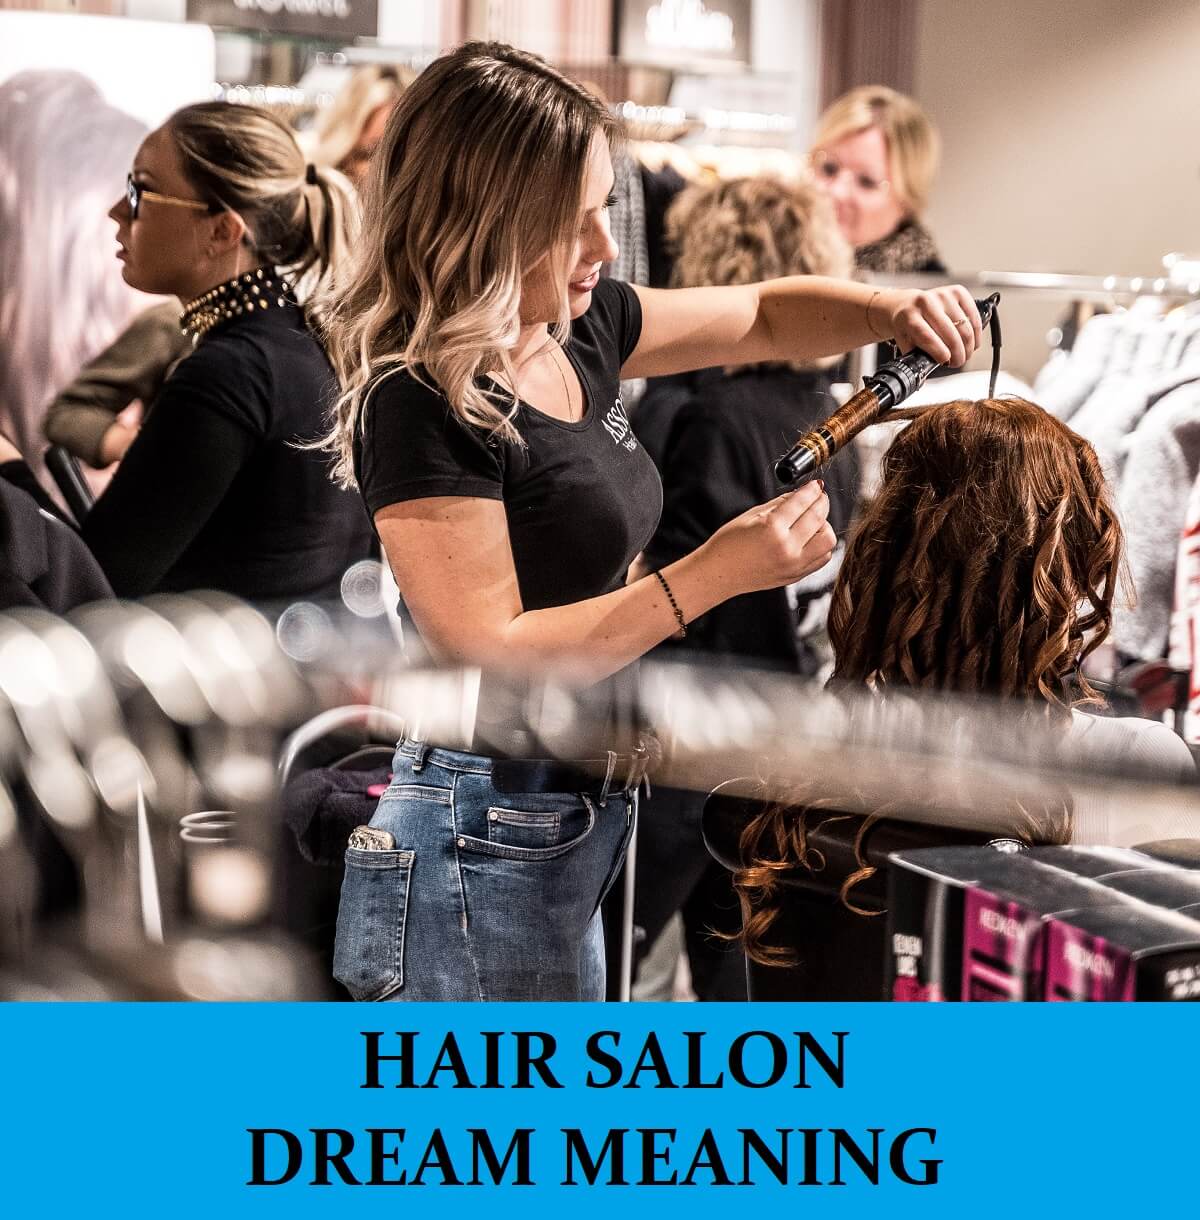 Hair Salon Dream Meaning - Top 4 Dreams About Salon or Barber : Dream  Meaning Net